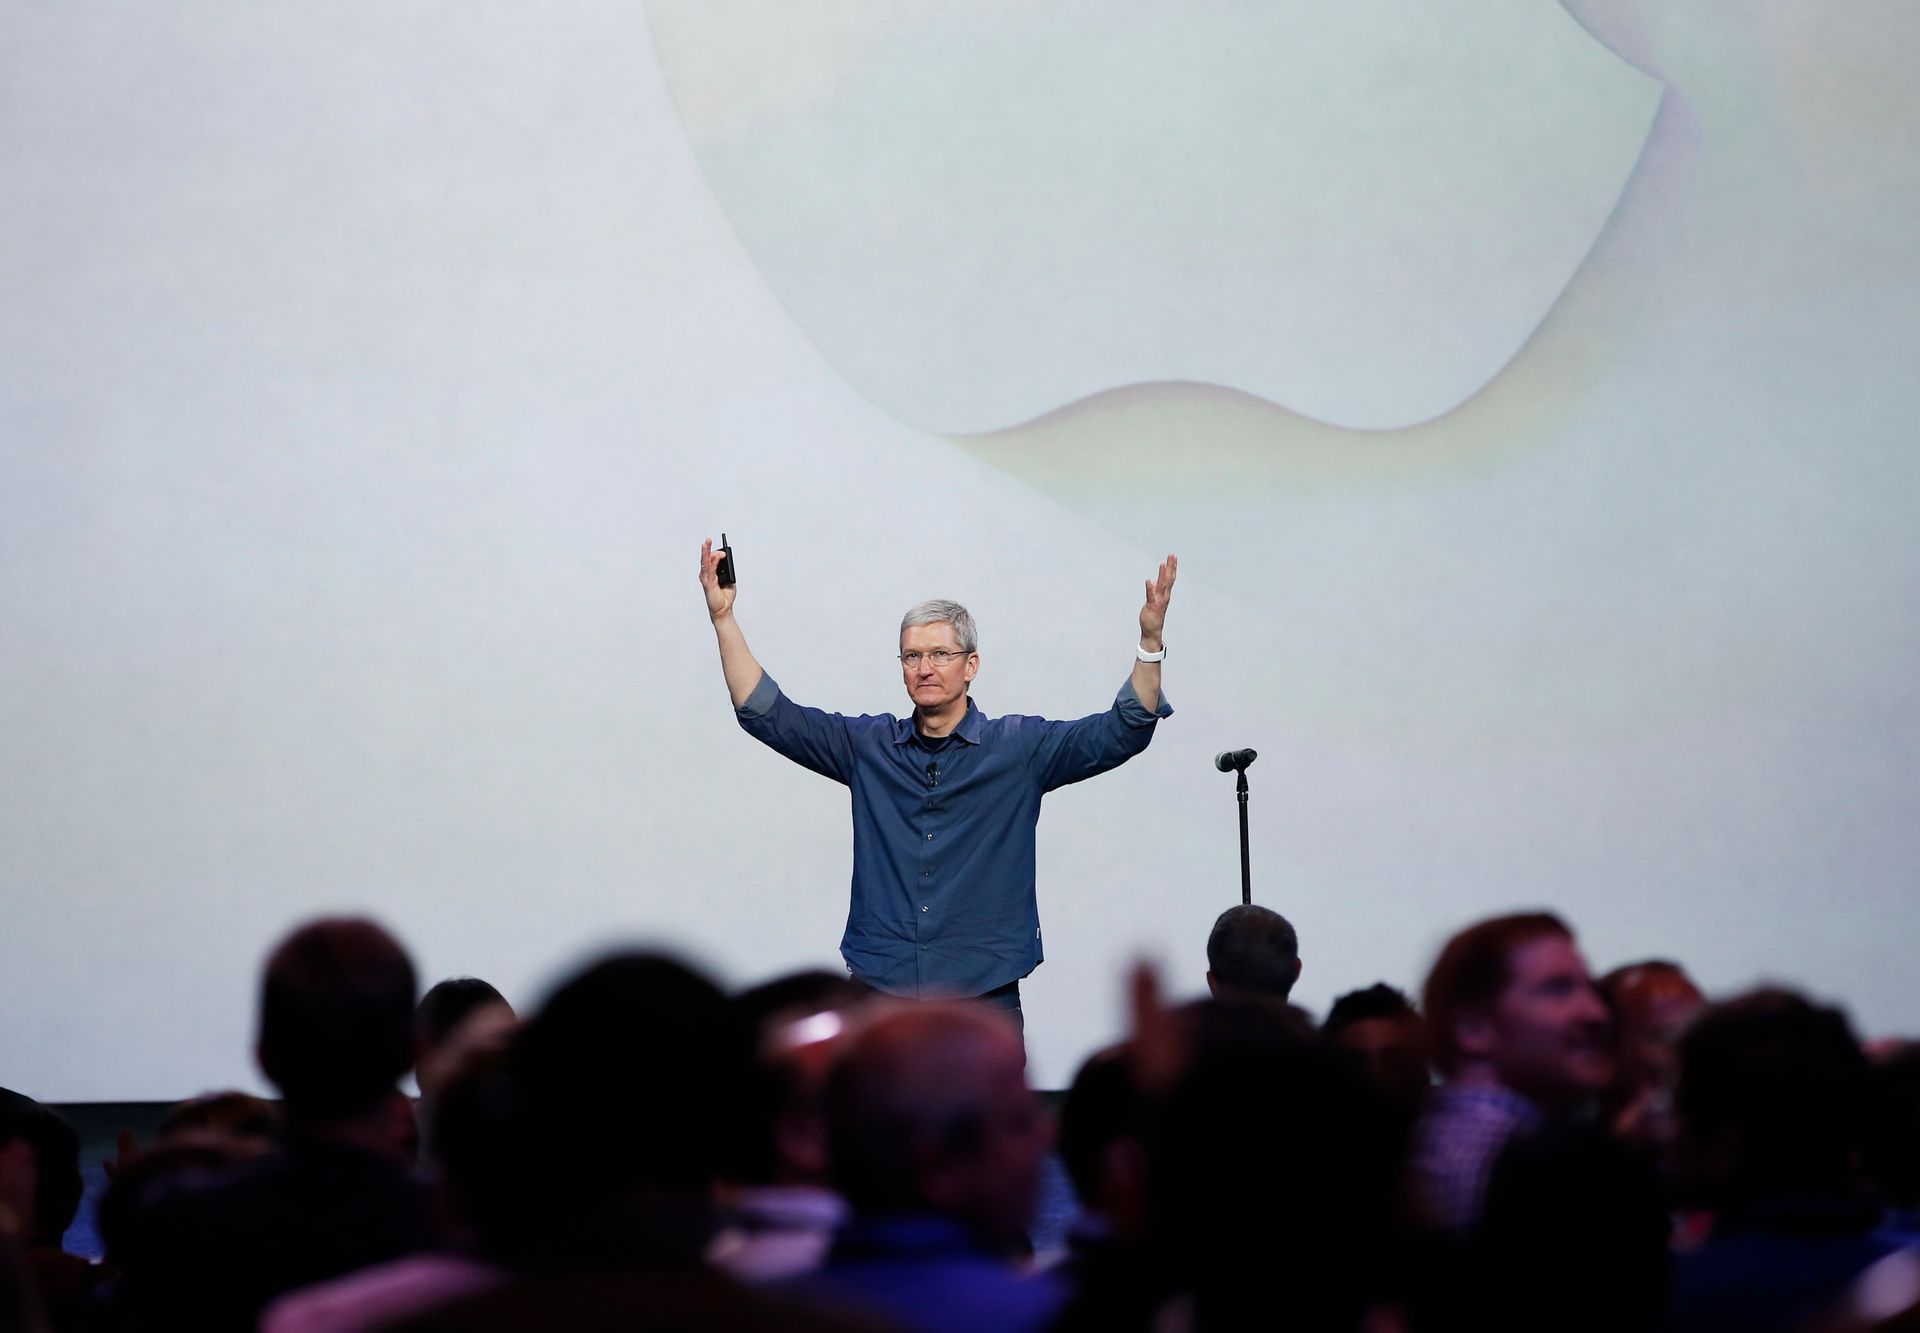 Apple CEO Tim Cook greets the audience during an Apple event announcing the iPhone 6 at the Flint Center in Cupertino